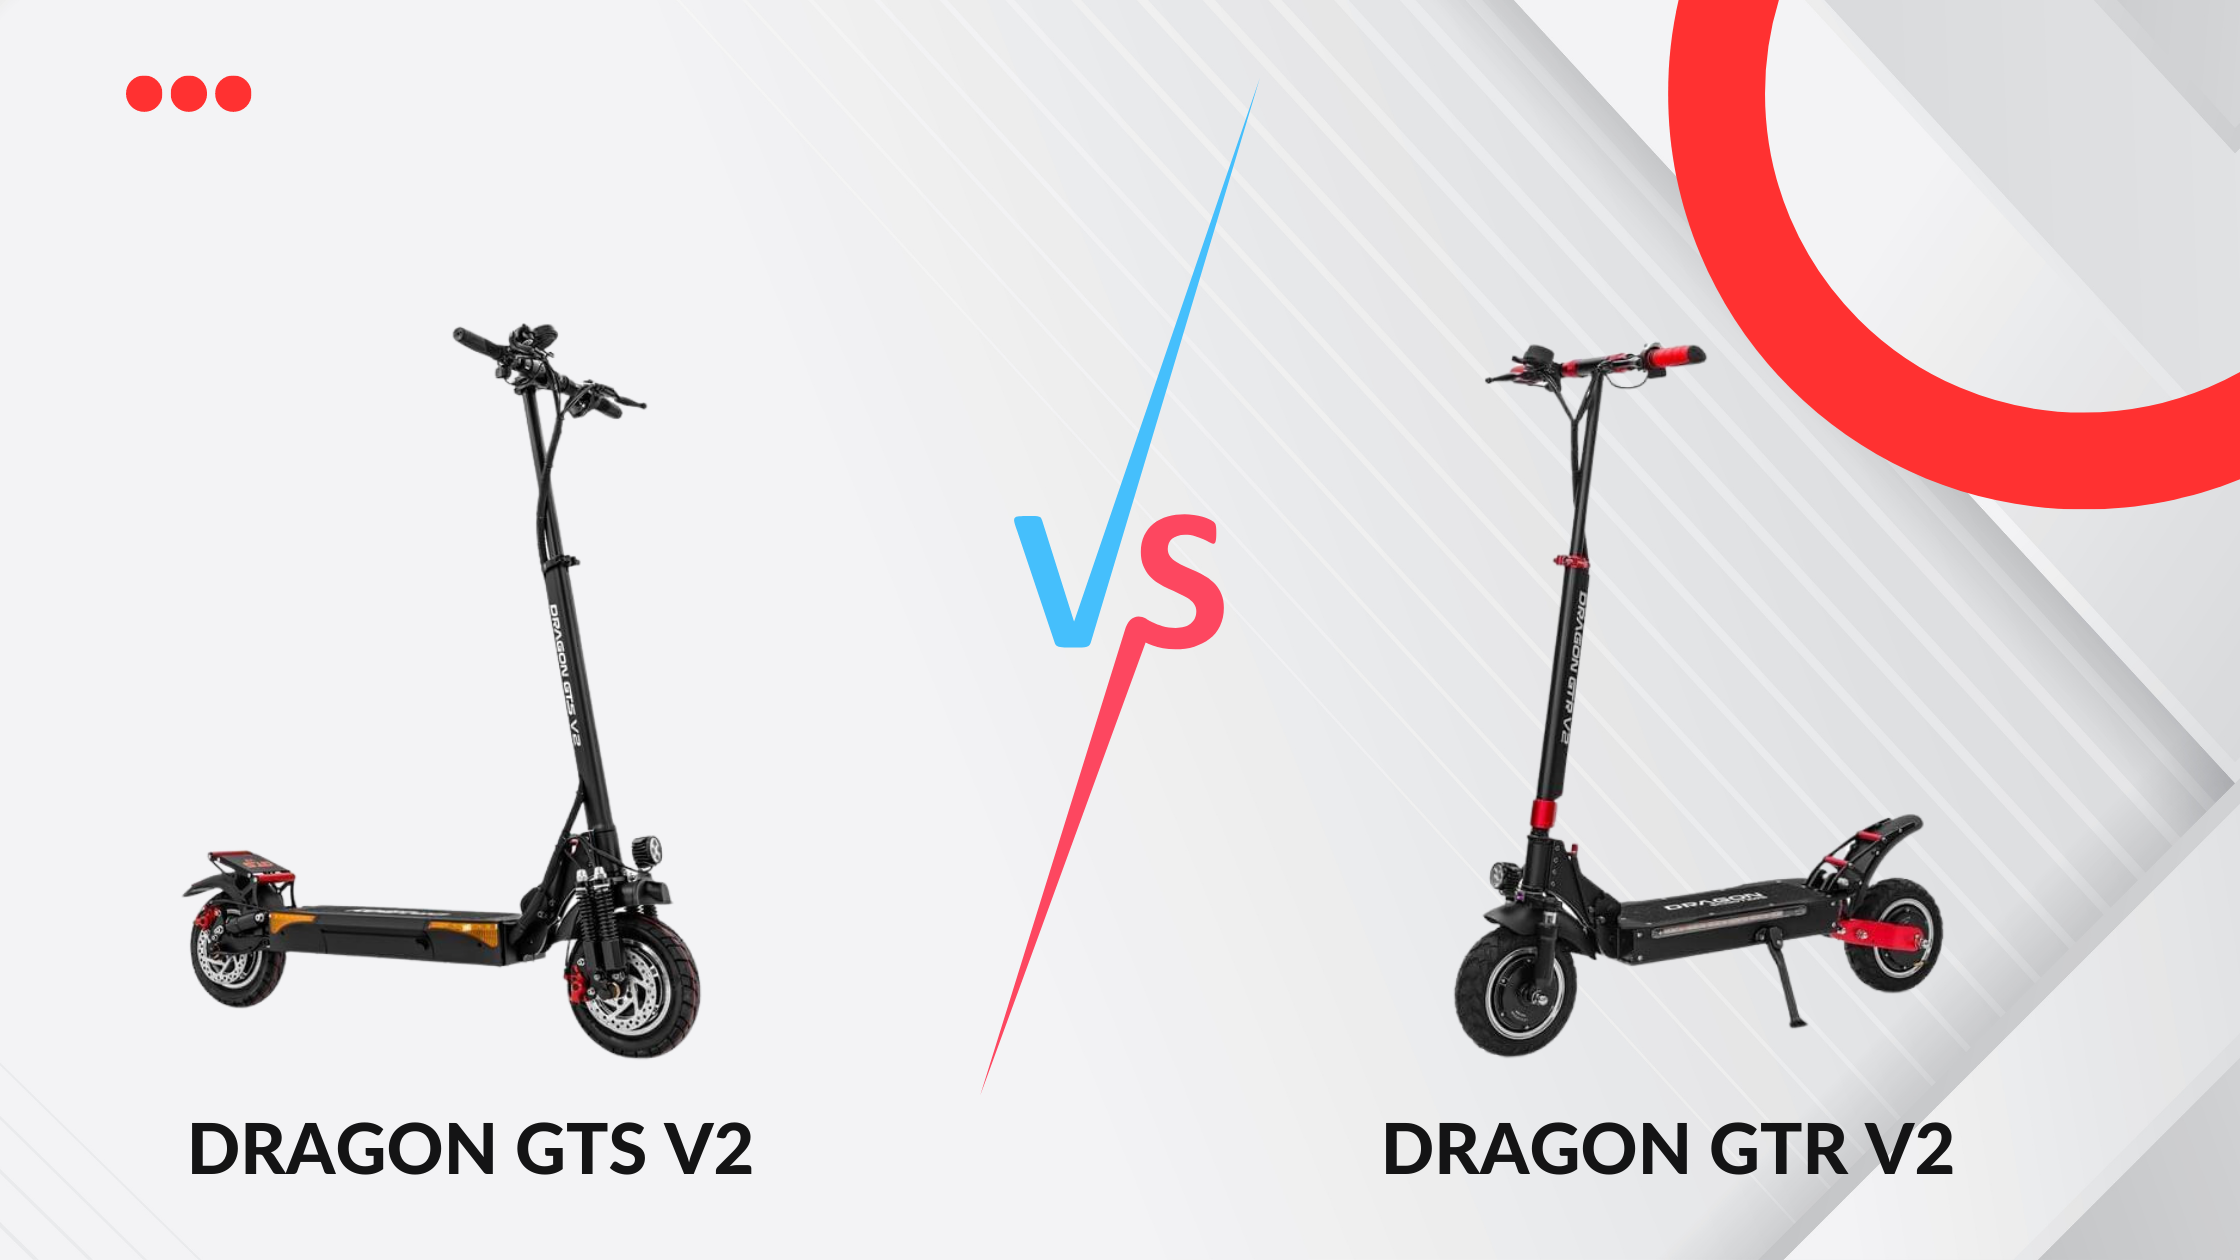 WHO WANTS THIS DRAGON GTR V2 ELECTRIC SCOOTER? 🛴 Our second place winner  will receive this DRAGON GTR V2 ELECTRIC SCOOTER! Now is the…